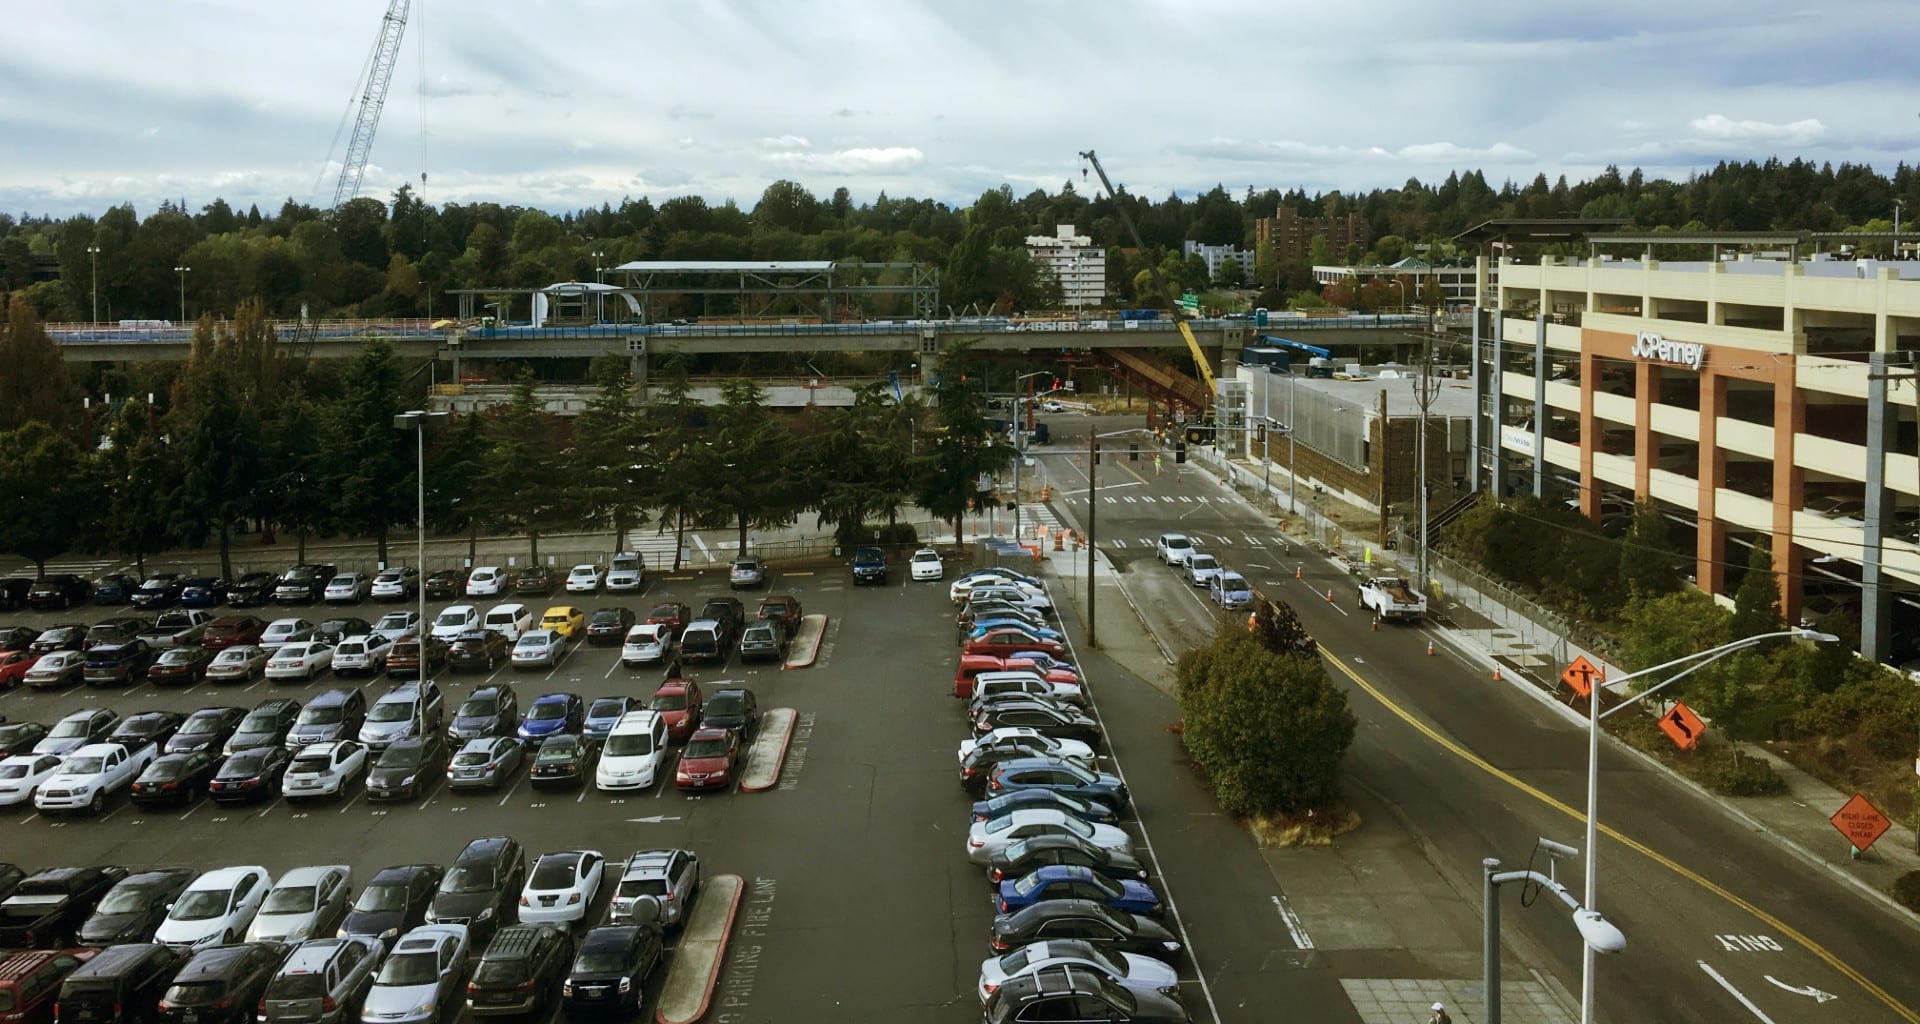 A photo of a parking lot.